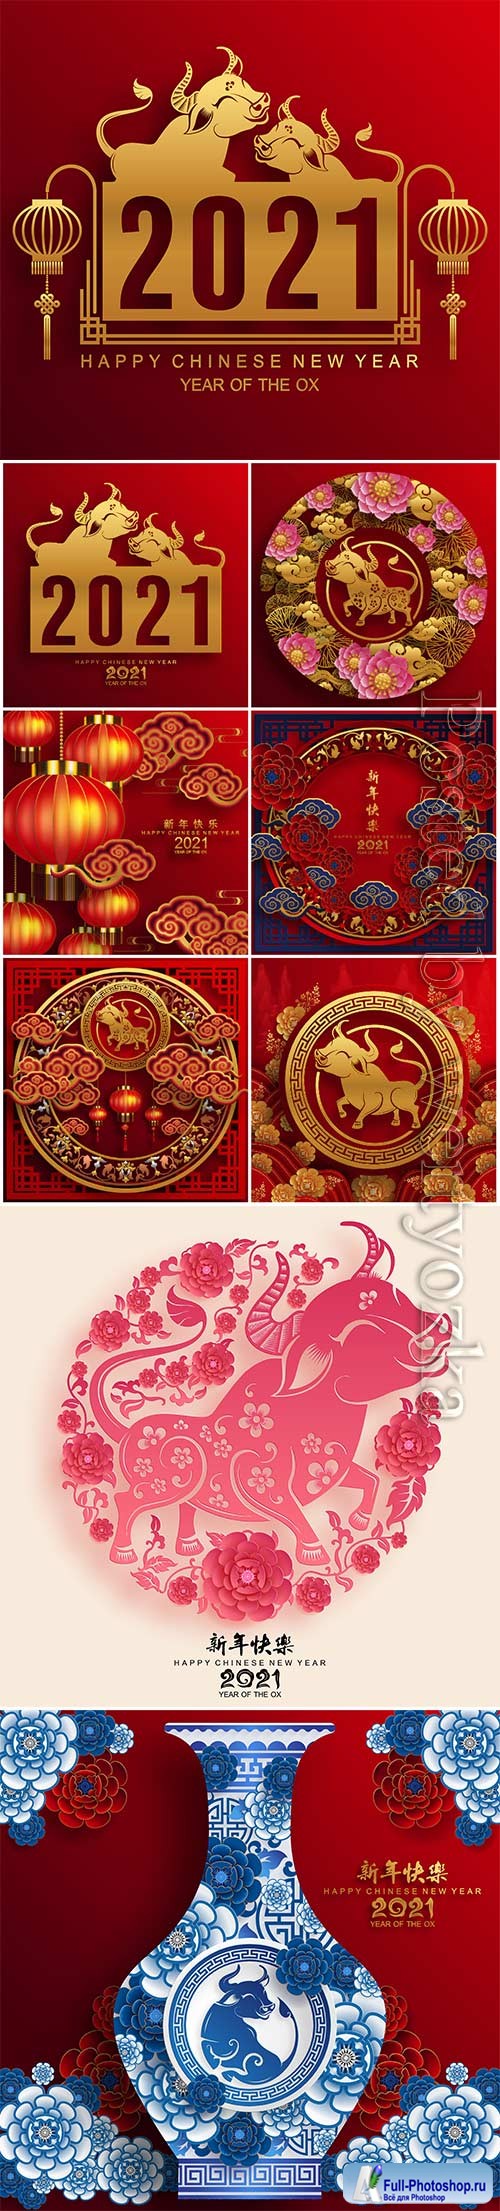 Chinese new year 2021 greeting vector poster